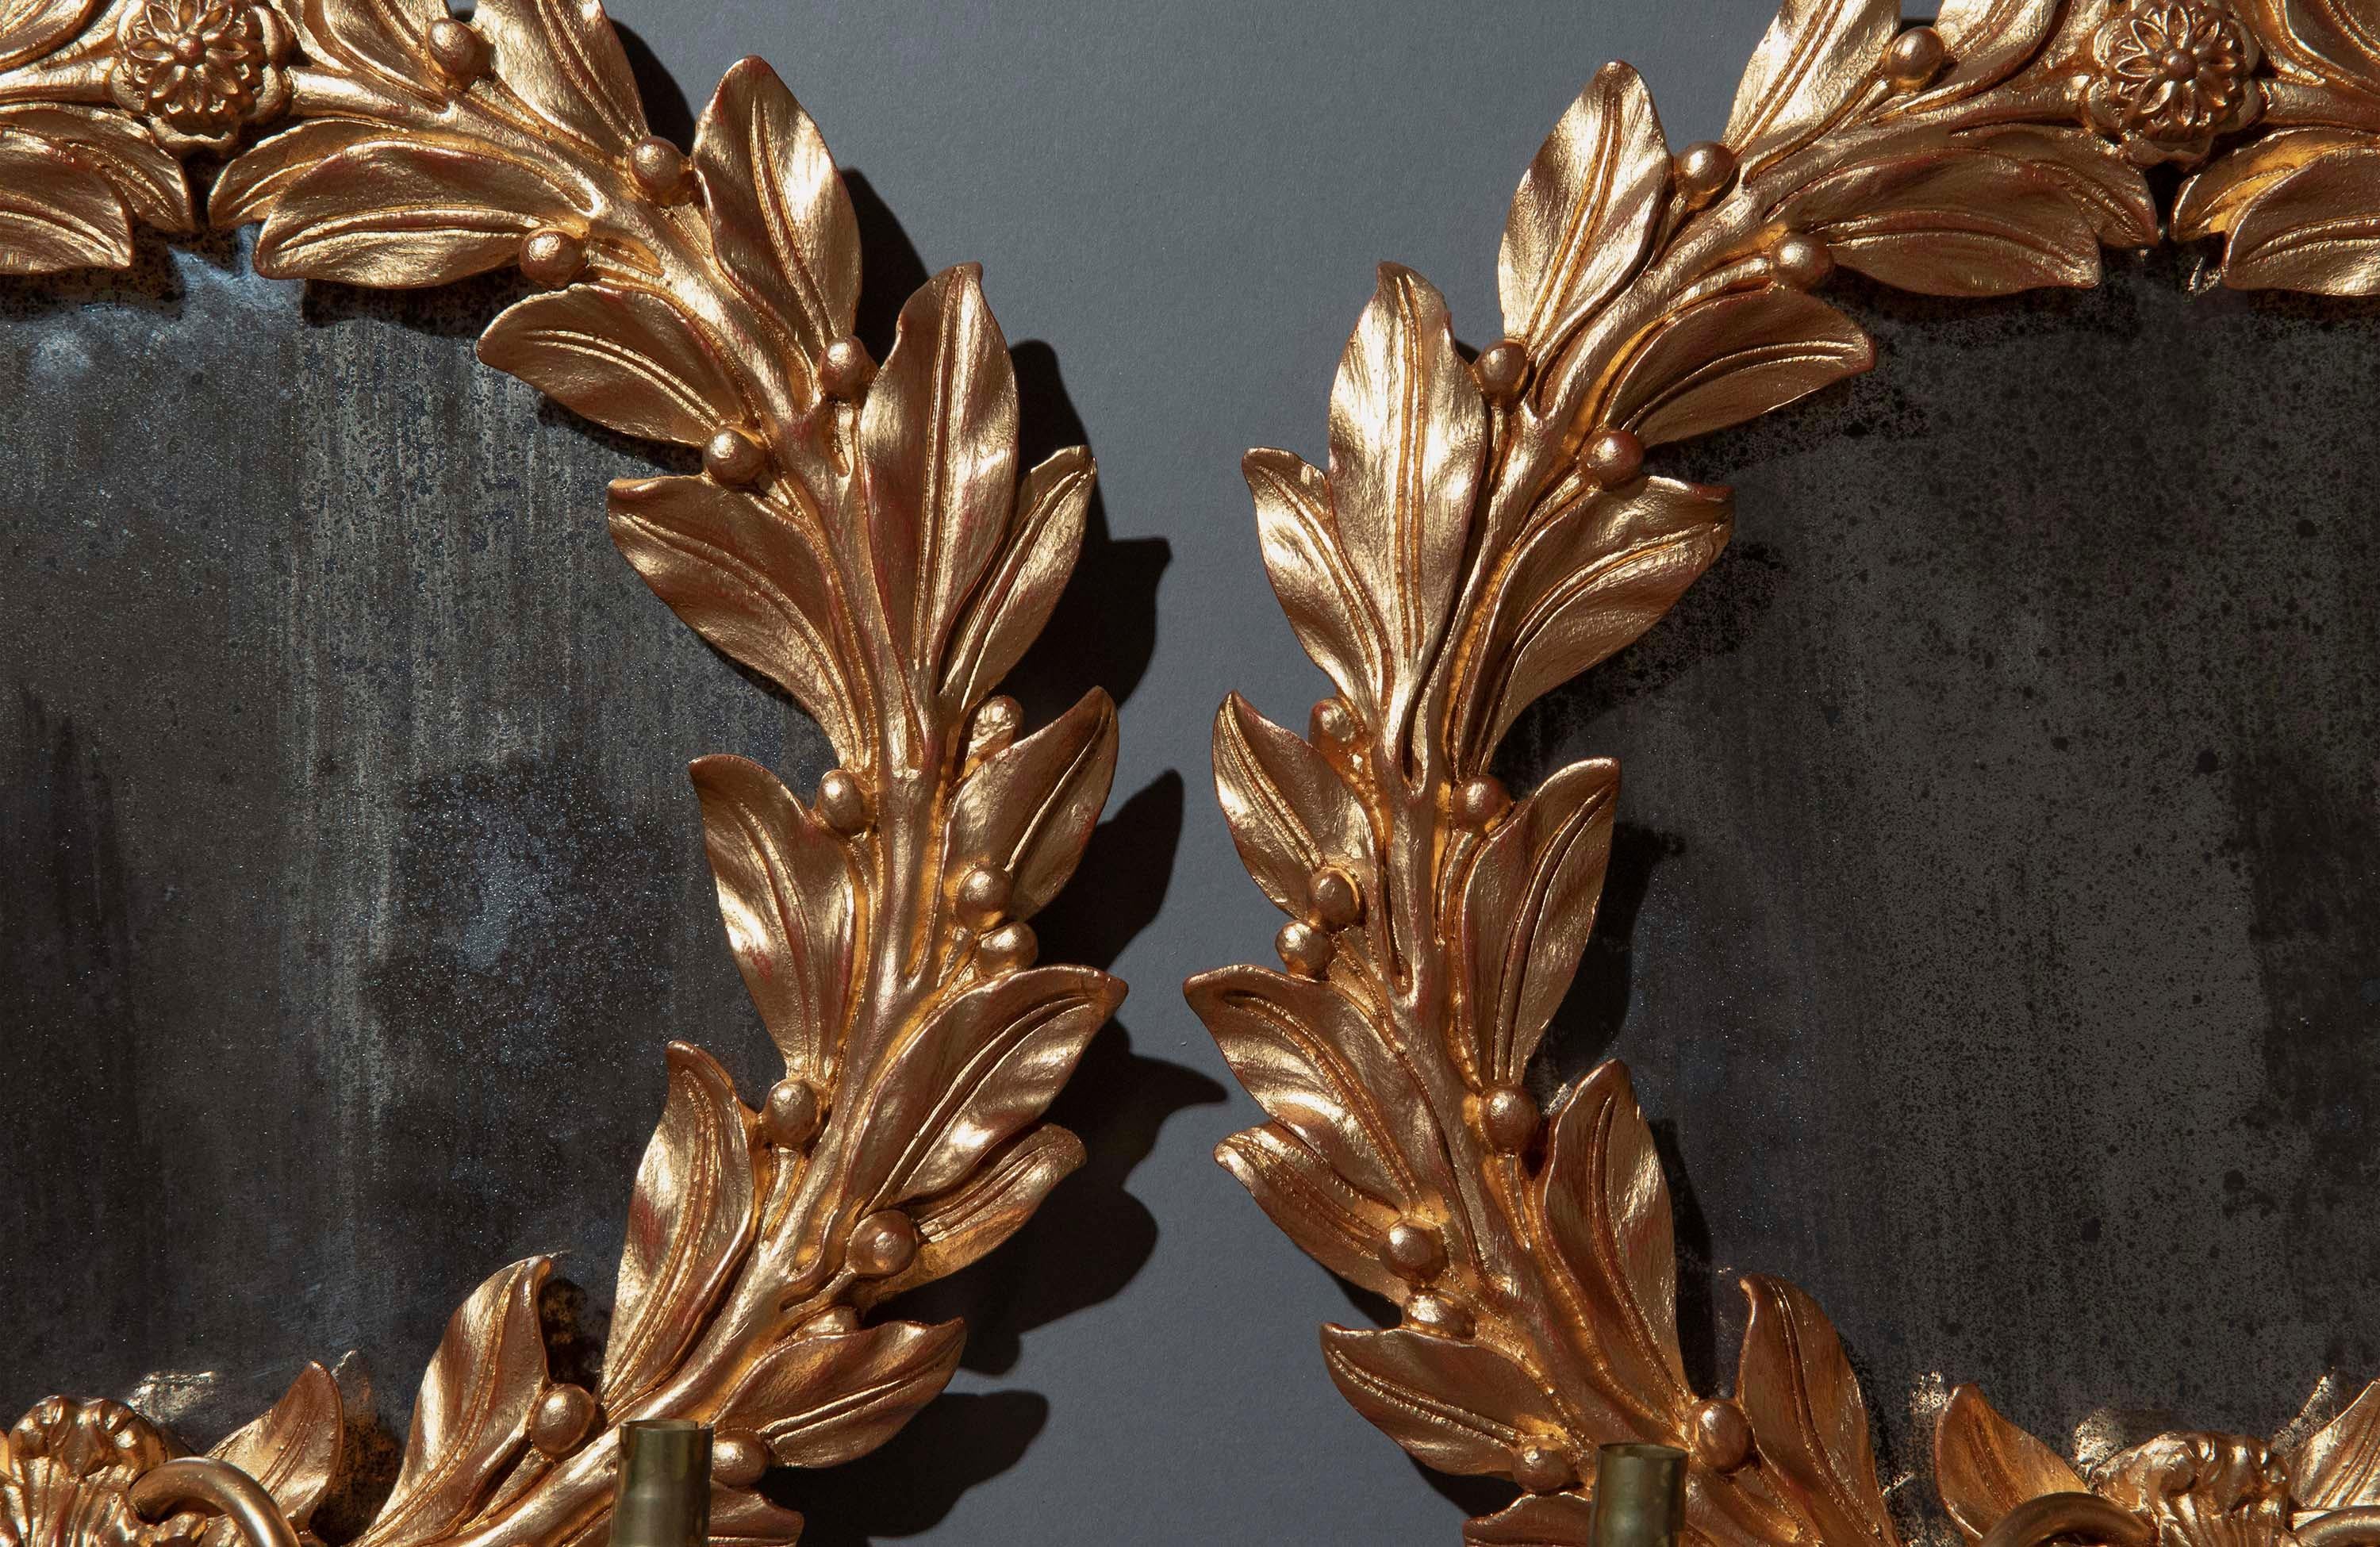 A stylish pair of laurel wreath shaped wall lights, with antiqued mirror plates and twin-arm sconces.
Mid-20th century.

Why we like them
Very chic objects for classic or eclectic interiors.

Ancient Greeks and Romans greatly valued the noble laurel